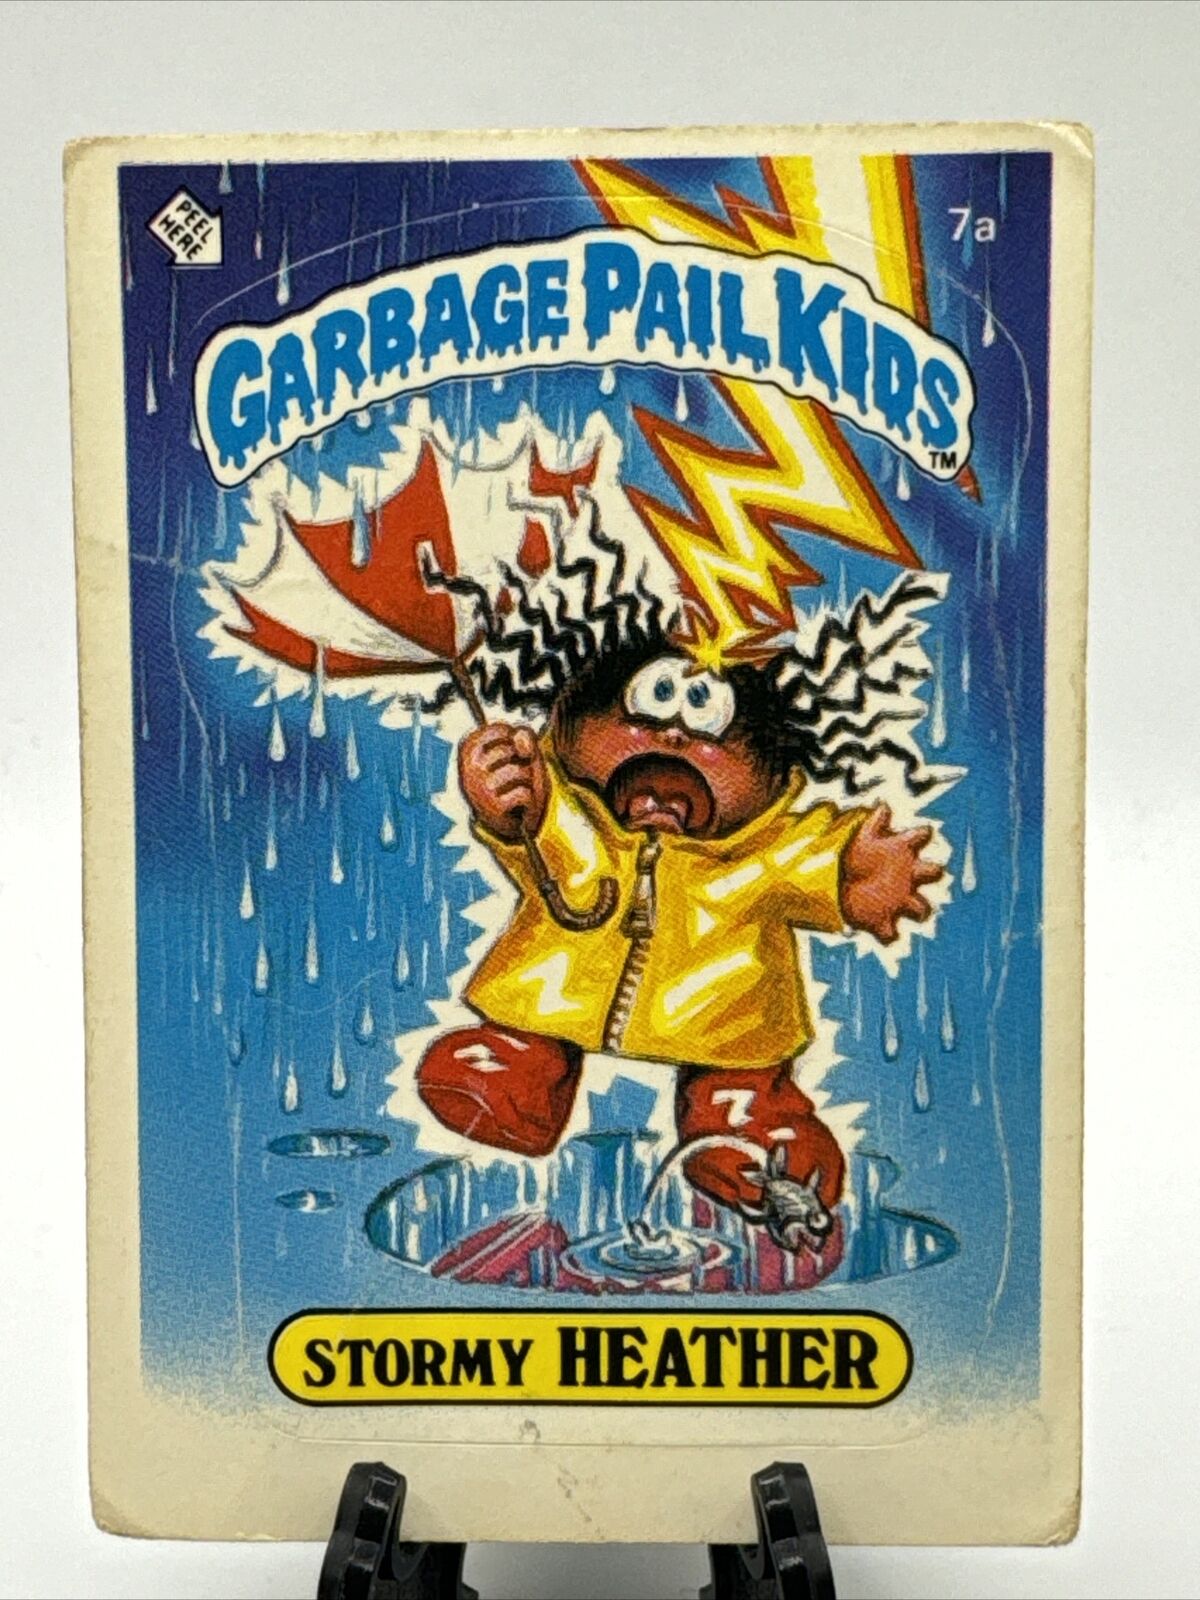 1985 Topps Garbage Pail Kids Series 1 Stormy Heather (One Star Back) #7a Matte